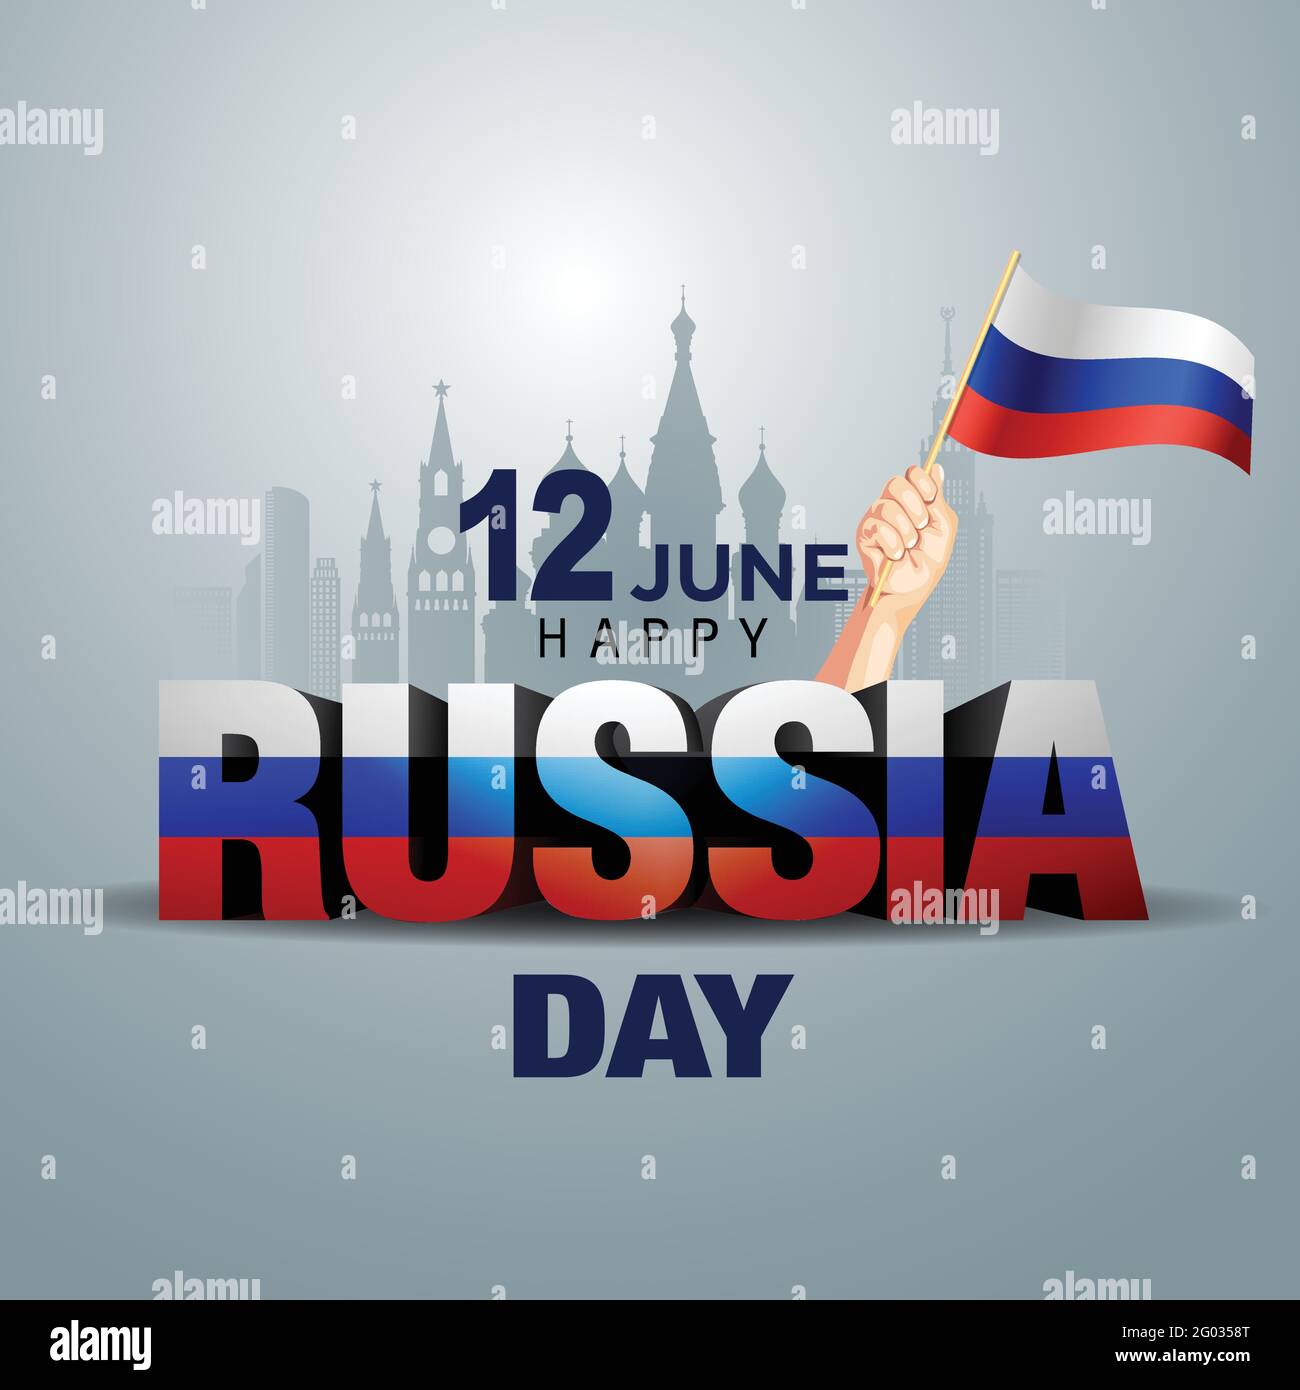 happy independence day Russia. vector illustration of Russian flag ...